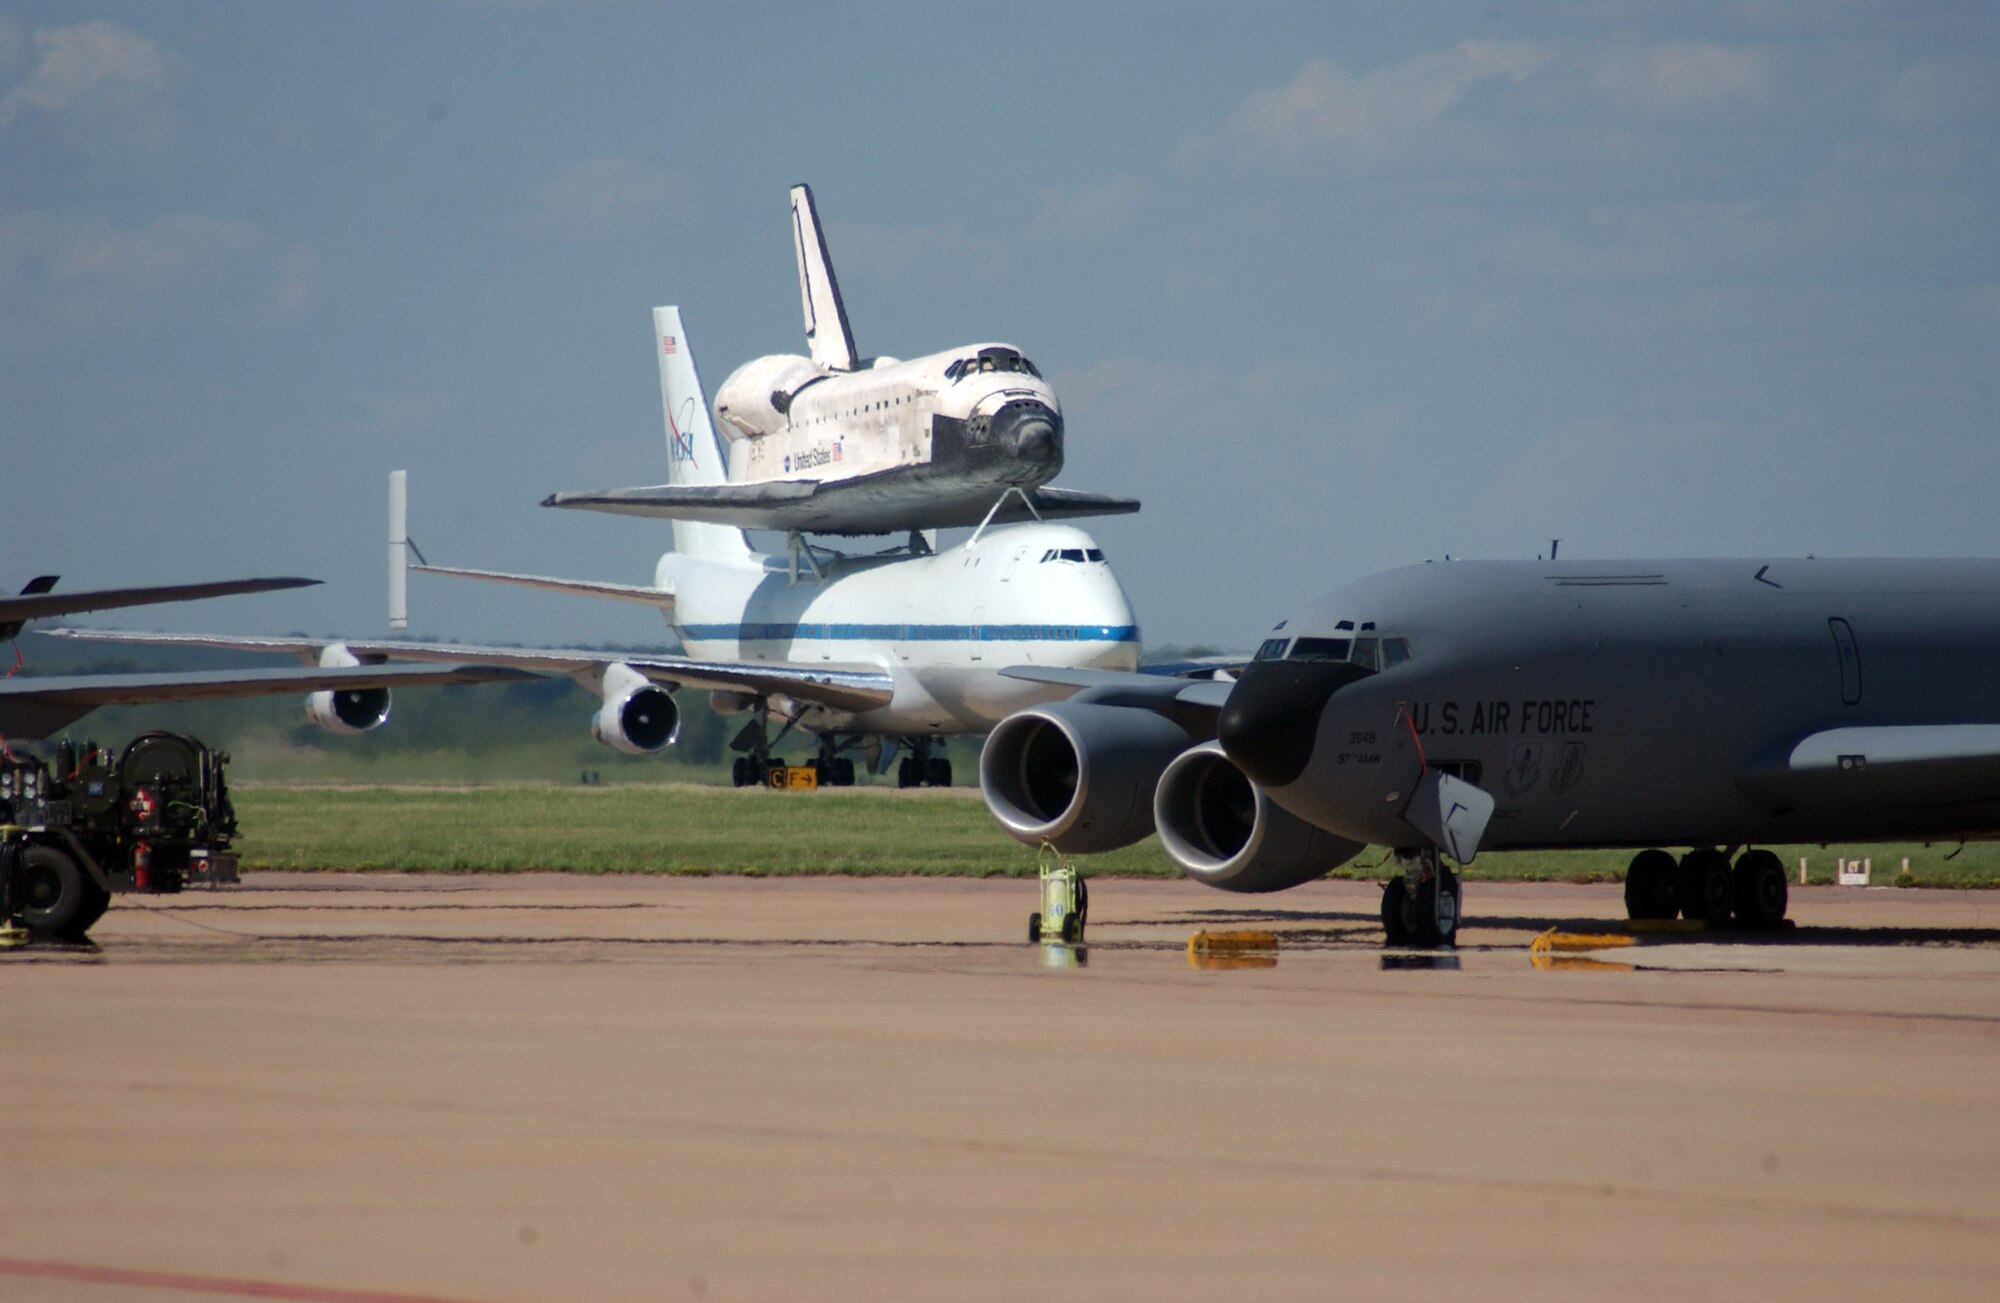 ALTUS AIR FORCE BASE, Okla. --  A NASA Boeing 747 carrying Space Shuttle Discovery, still scorched from its re-entry into Earth's atmosphere, taxis for takeoff here on Aug. 19.  Discovery's stop was the first of two as the shuttle was on its way back to Kennedy Space Center, Fla., after landing at Edwards Air Force Base, Calif., Aug. 9.   (U.S. Air Force photo by Staff Sgt. Monique Randolph) 